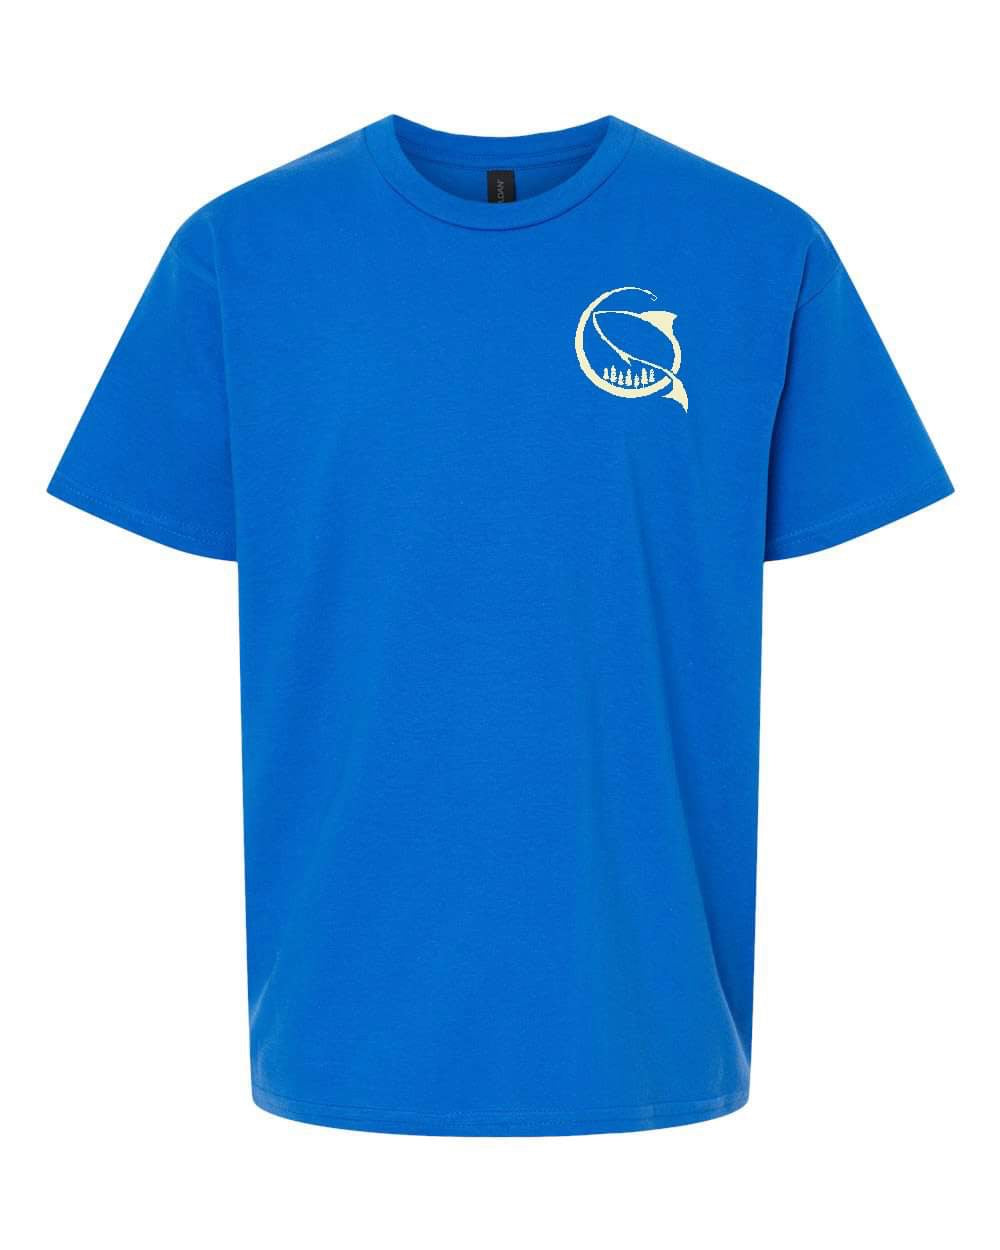 YOUTH SOFT STYLE TEE IN ROYAL BLUE WITH CREAM INK